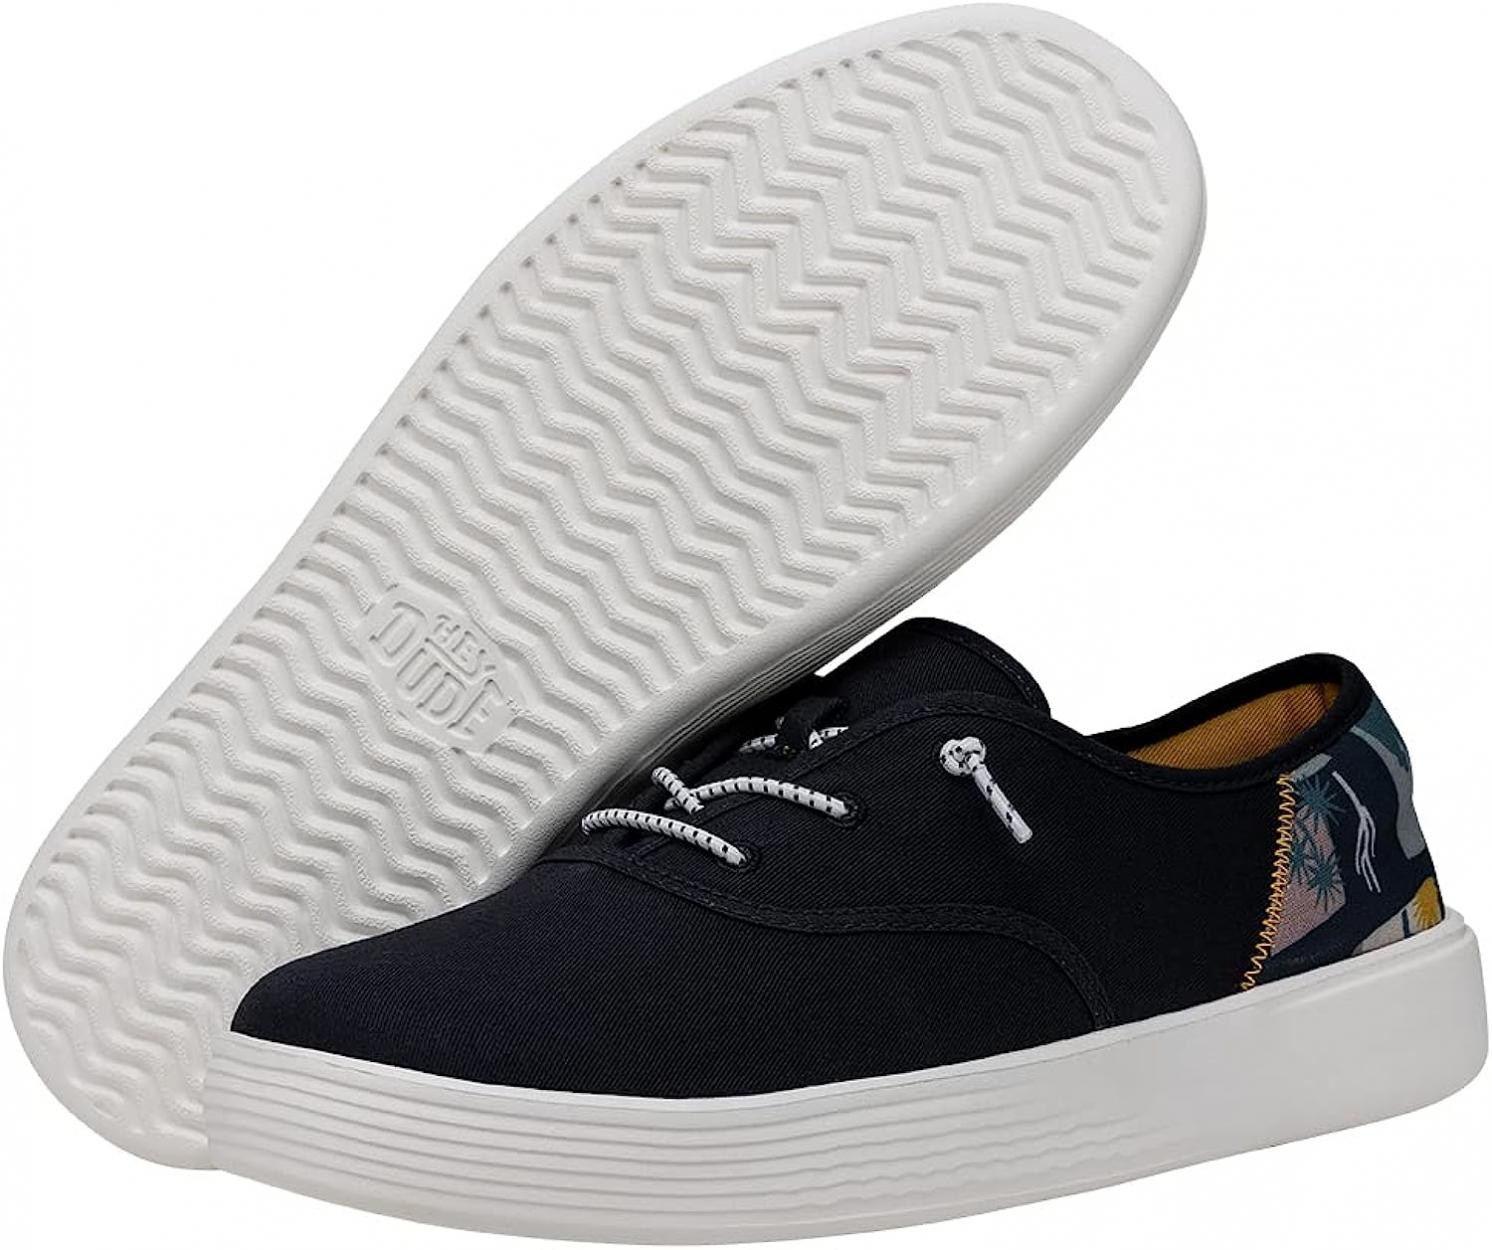 Hey Dude Conway Desert | Unisex Sneakers | Unisex Slip On Shoes | Comfortable & Light-Weight